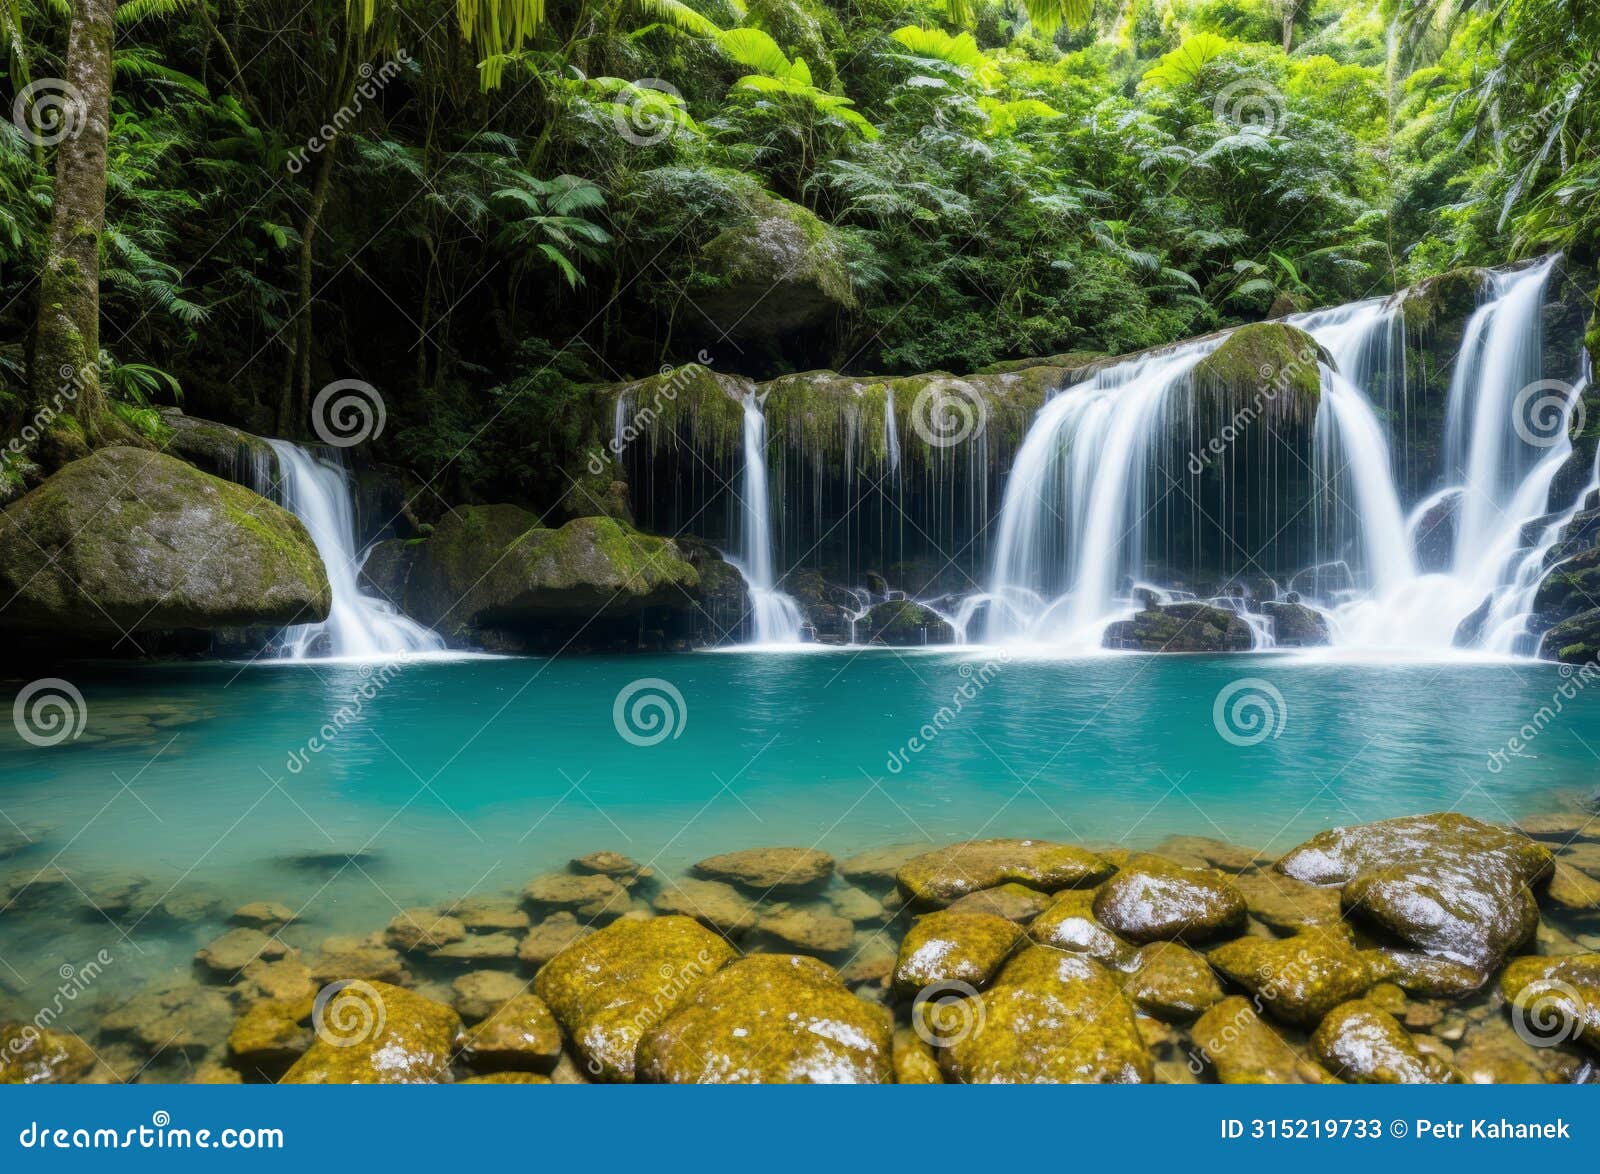 a powerful waterfall plunging into a secluded pool in the heart of a dense jungle, surrounded by towering trees and